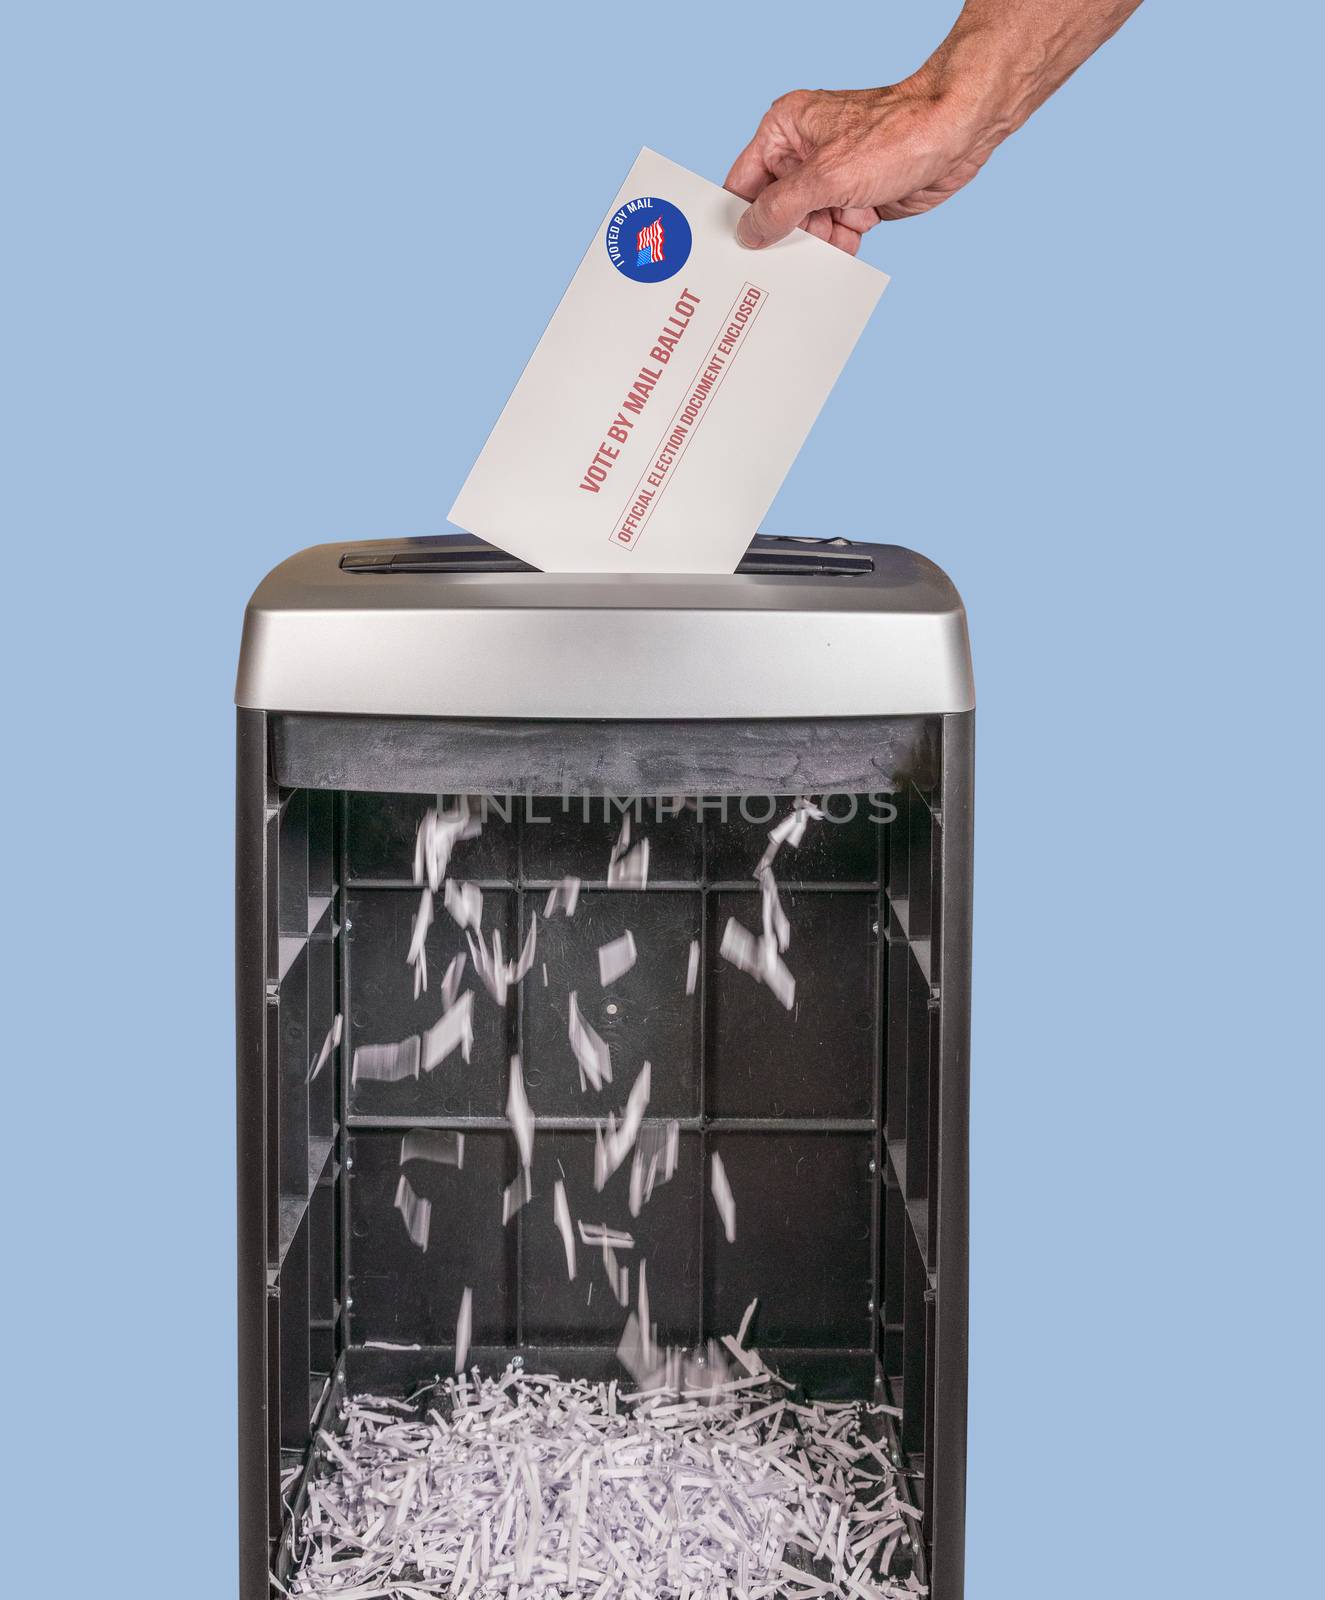 Absentee ballot of vote by mail envelope being shredded in an office shredder by steheap